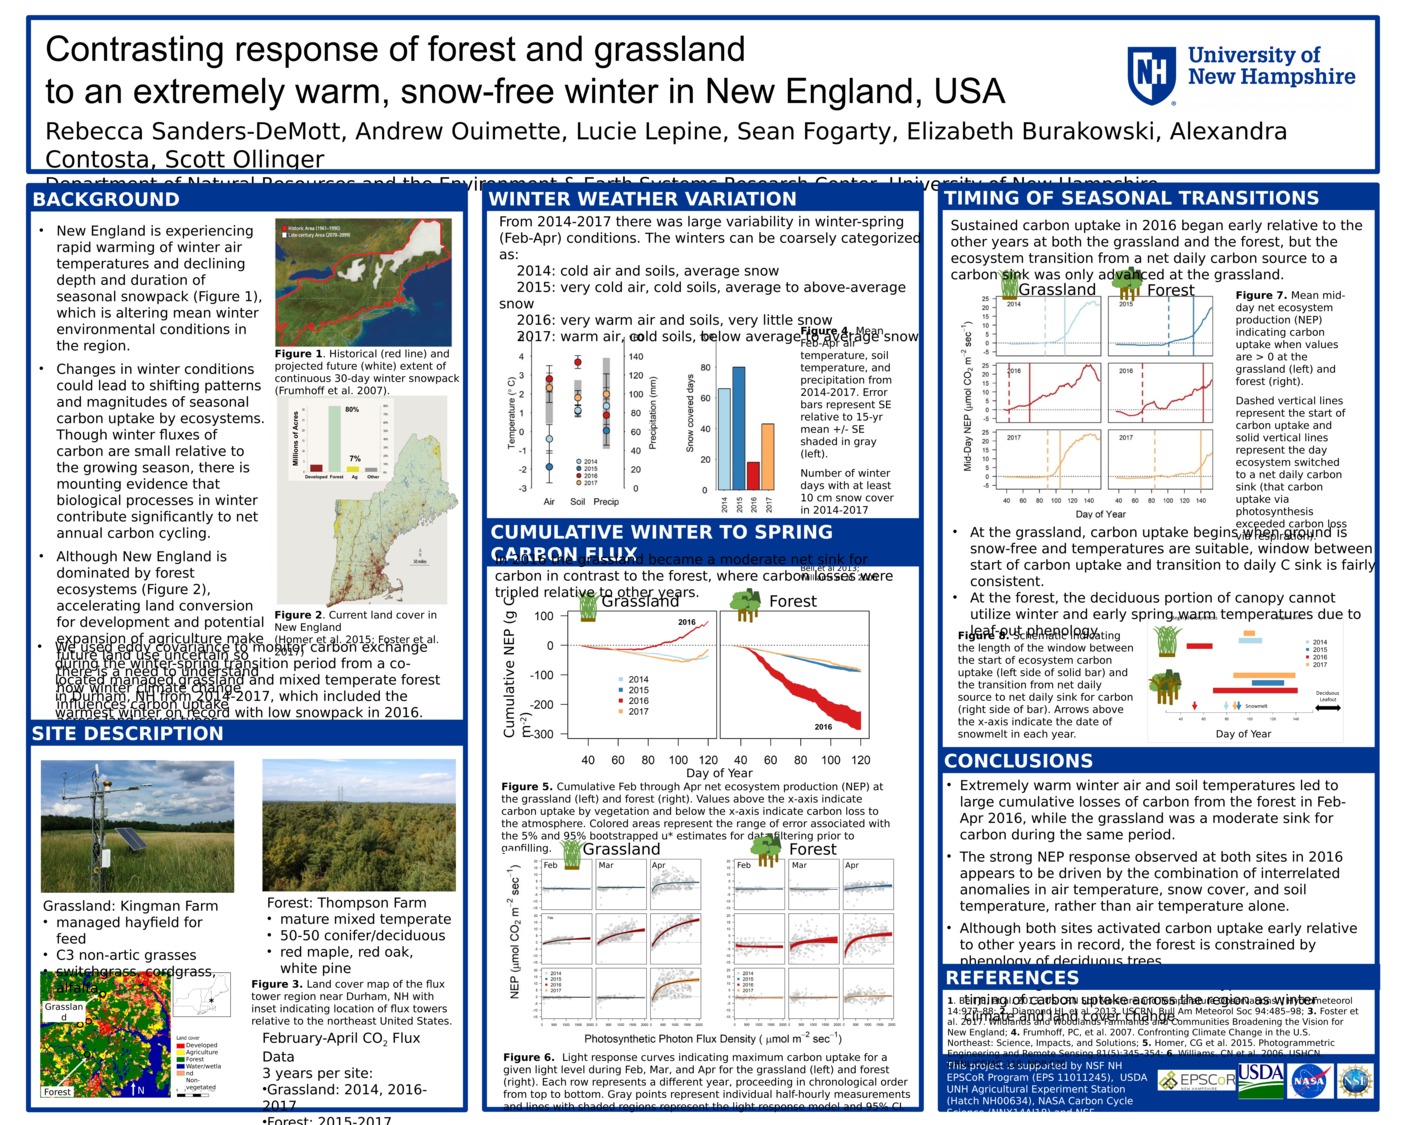 Contrasting Response Of Forest And Grassland To An Extremely Warm, Snow-Free Winter In New England, Usa by rnk26